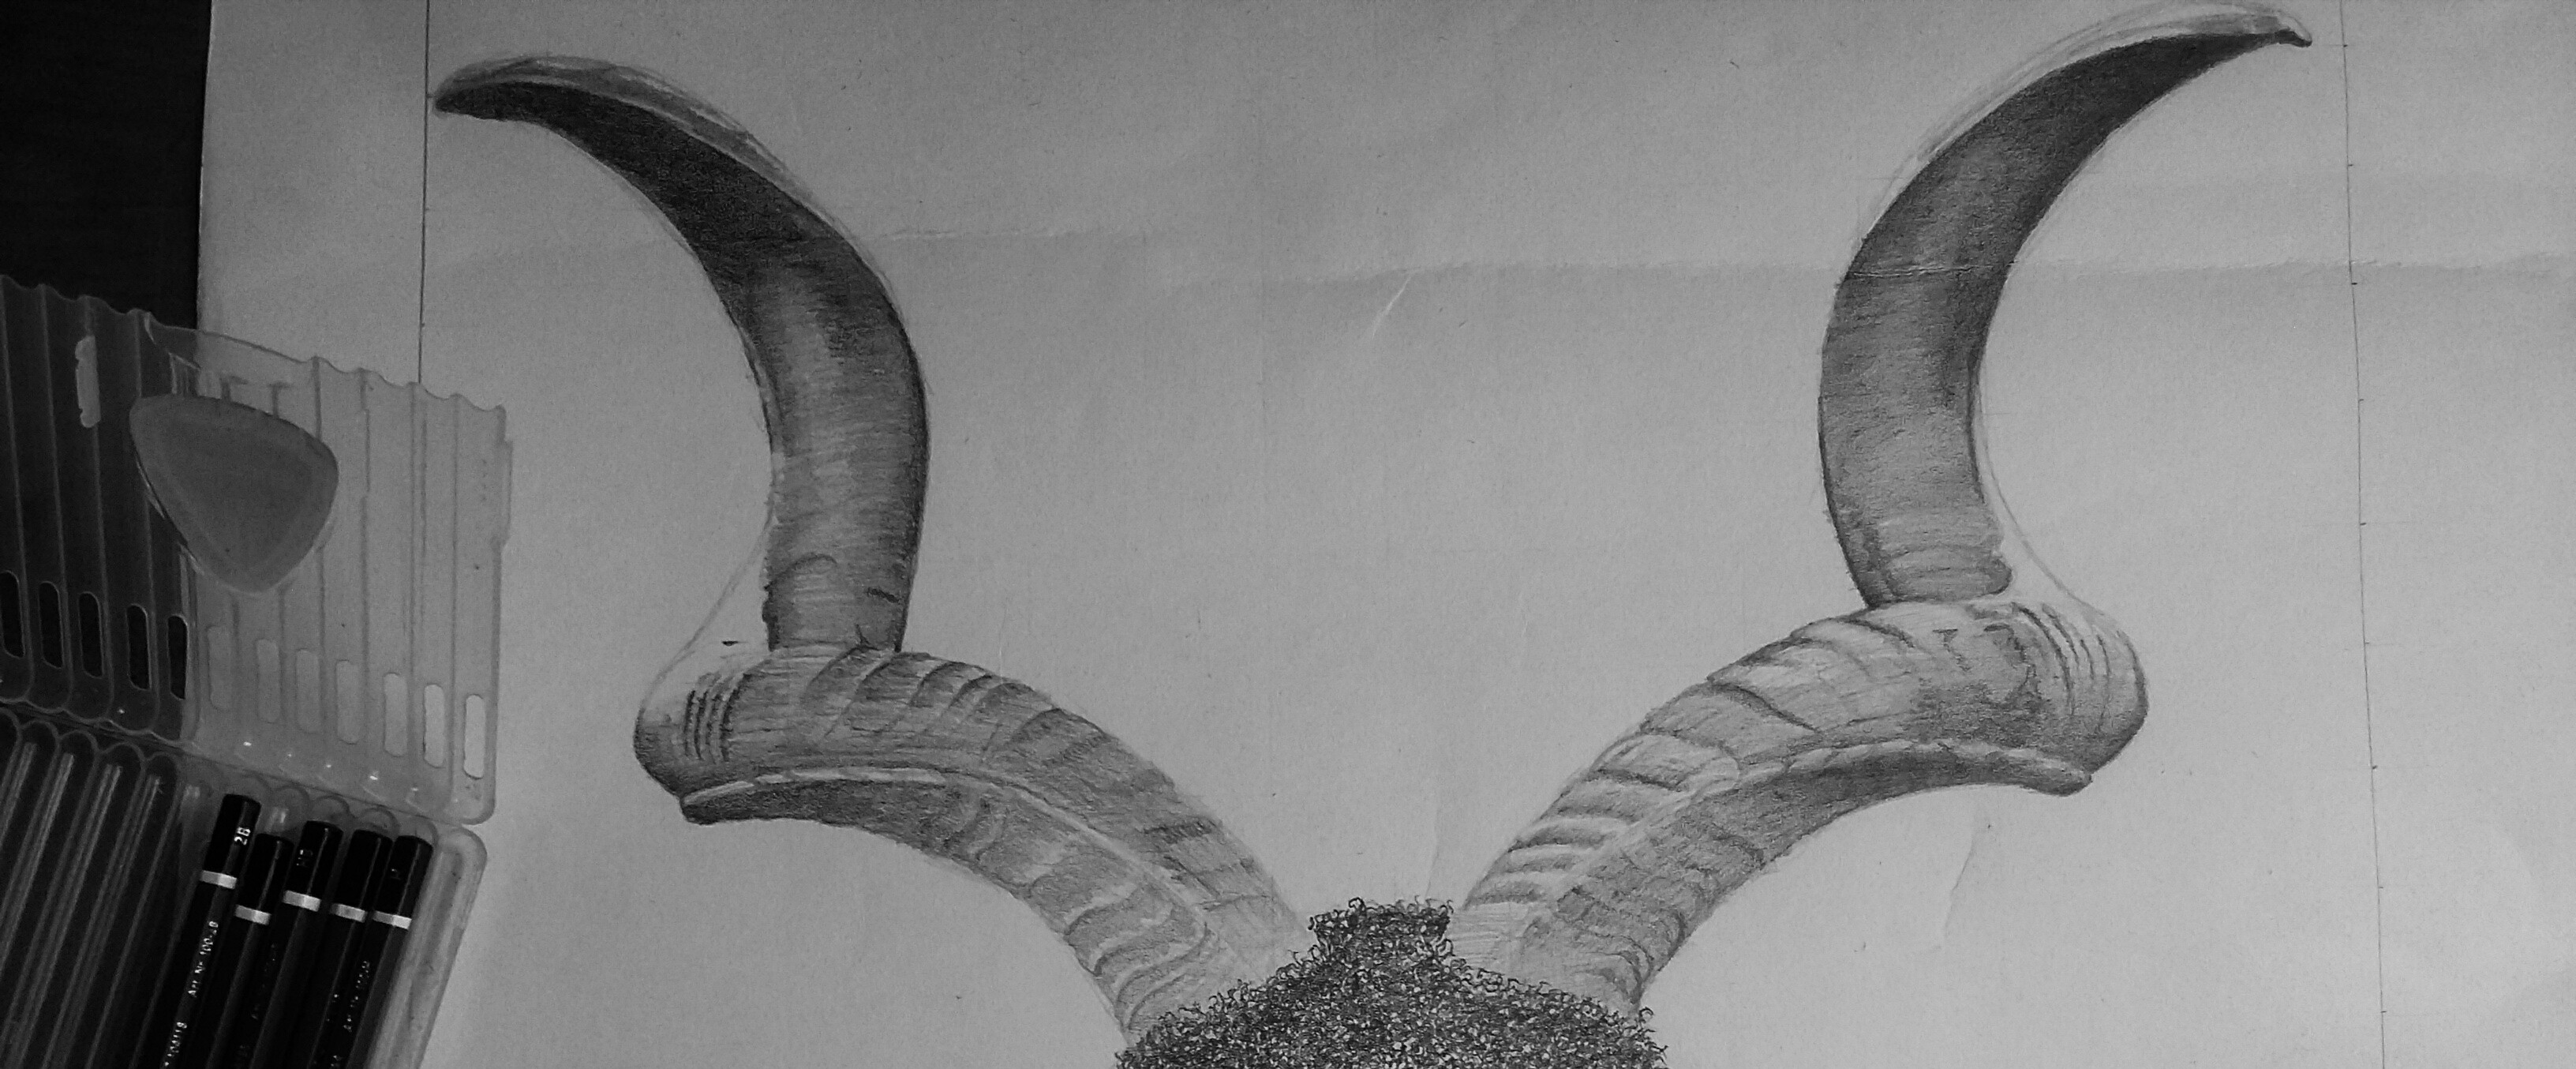 This is an Art work. A sketch of a horn by Dick David